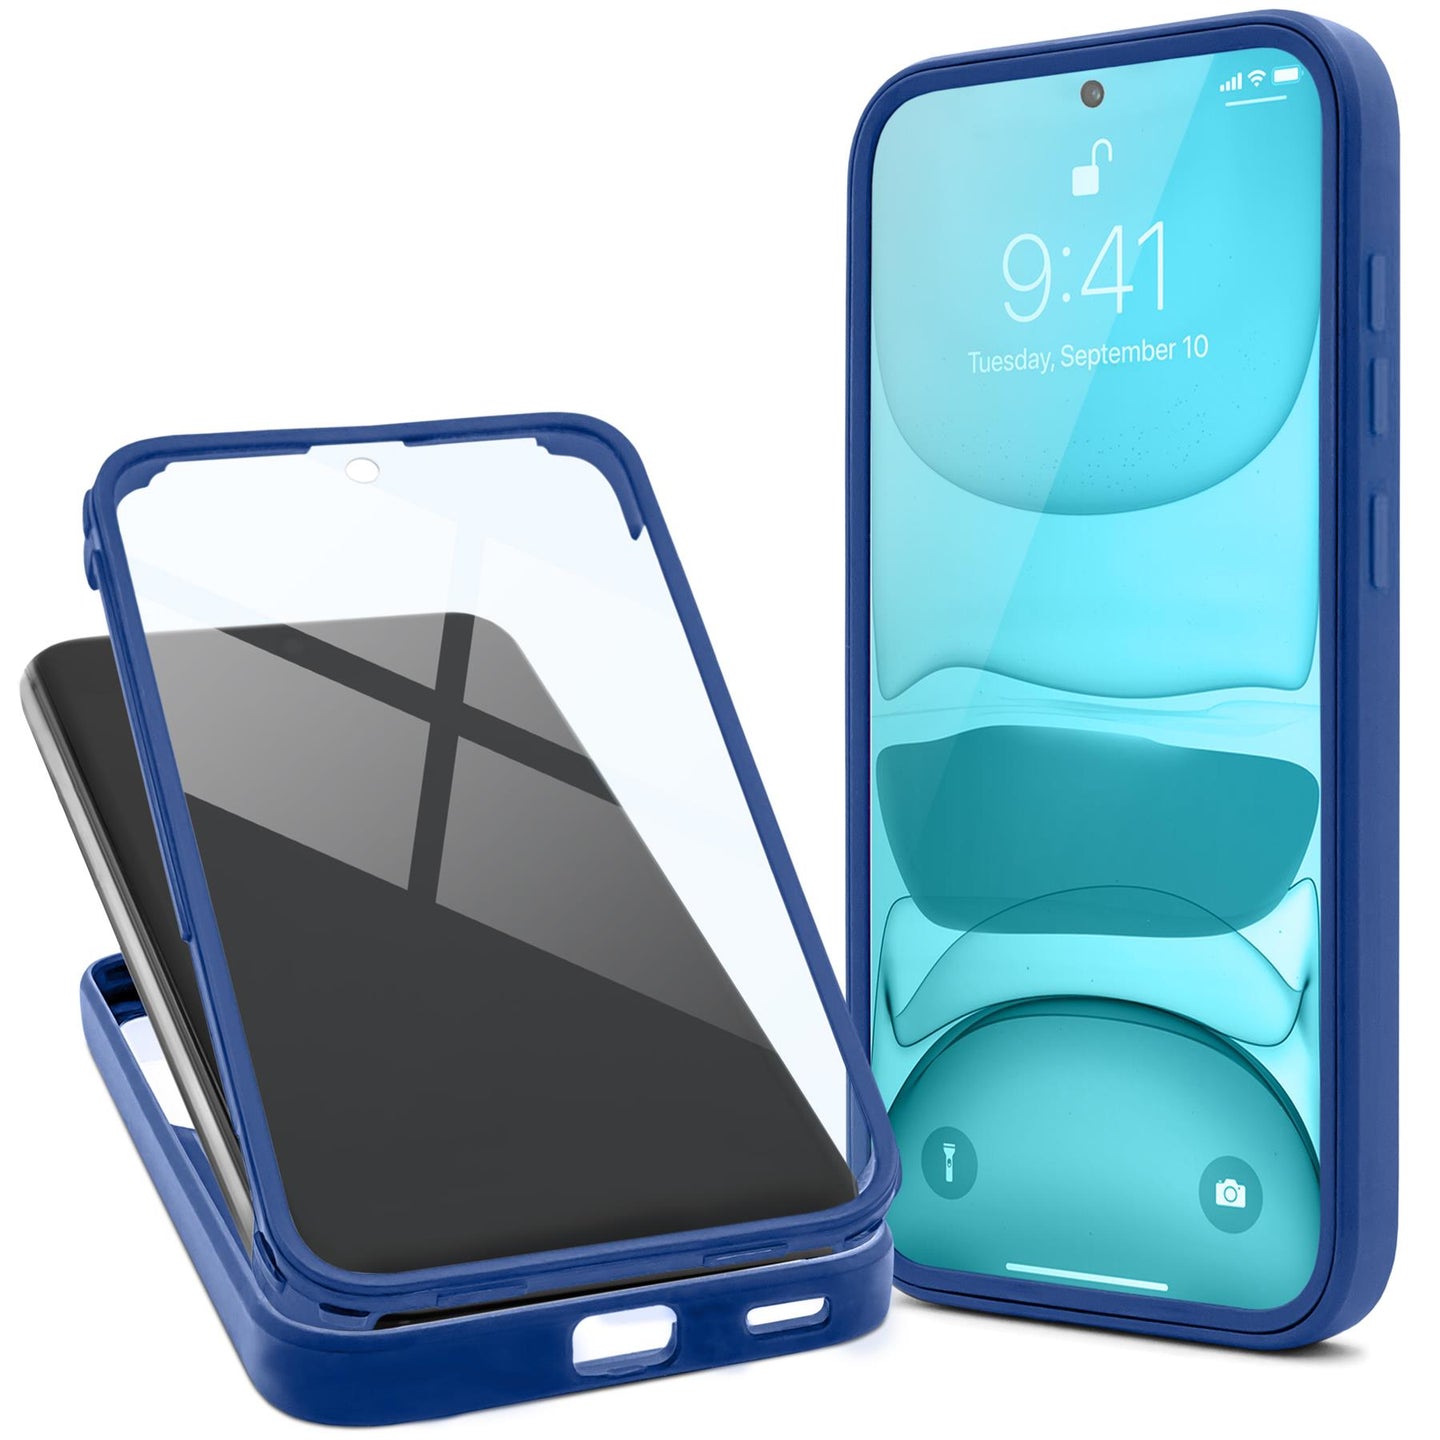 Moozy 360 Case for Samsung S21 FE - Blue Rim Transparent Case, Full Body Double-sided Protection, Cover with Built-in Screen Protector